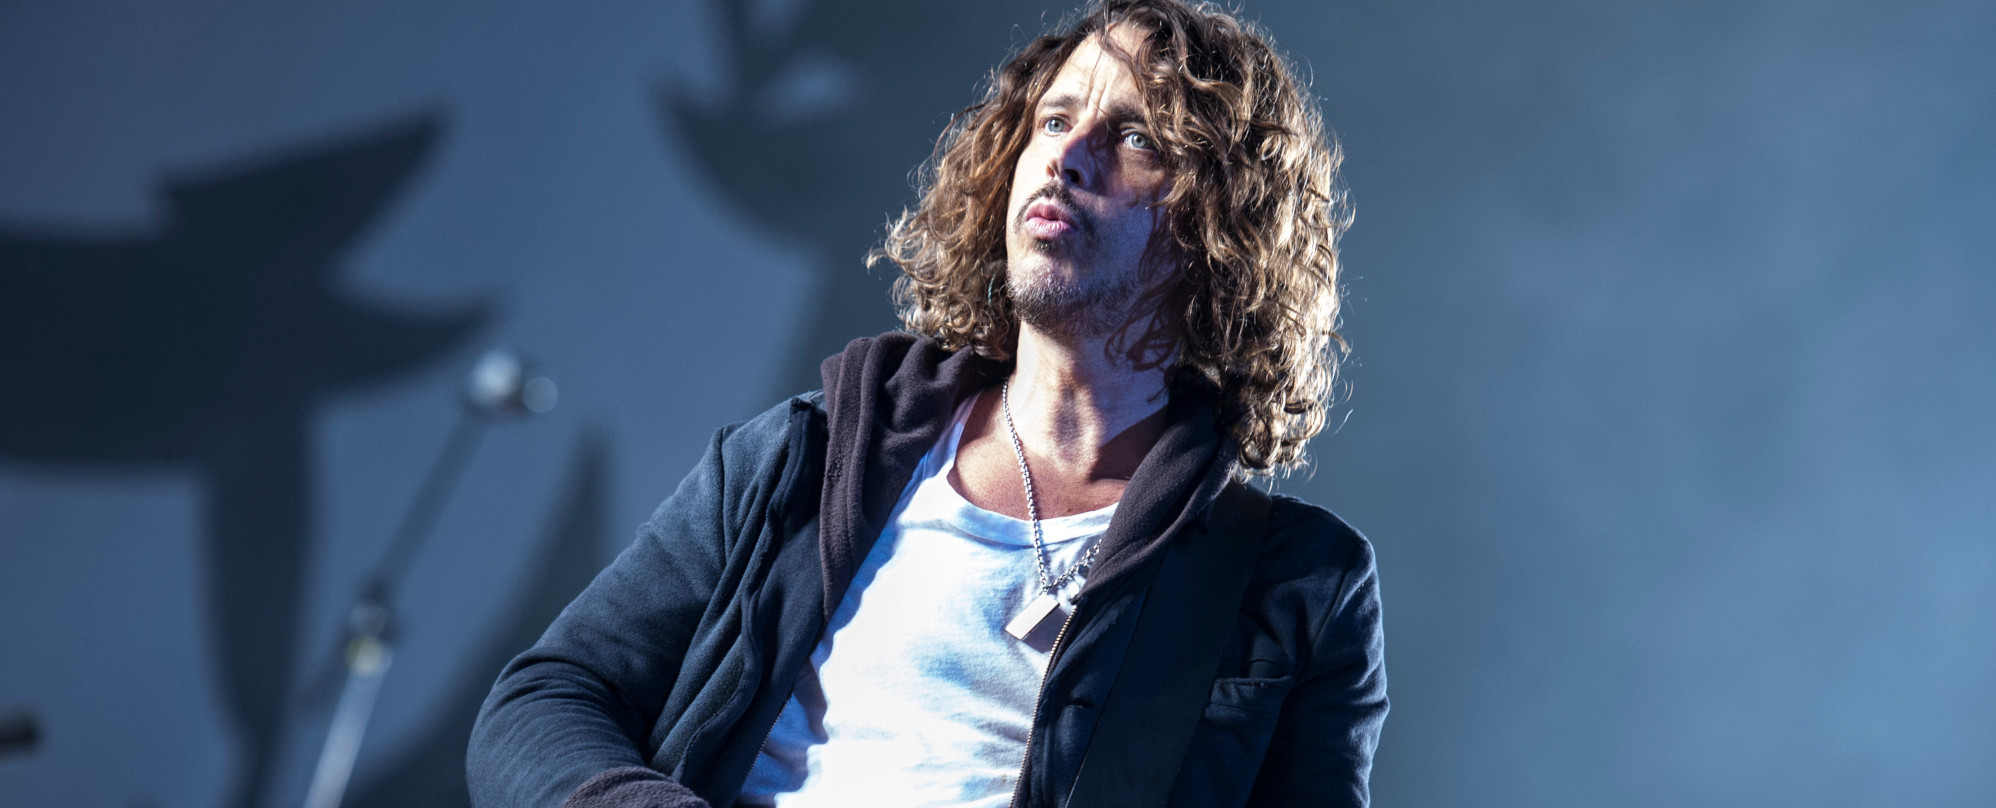 3 Songs You Didn’t Know Chris Cornell Wrote Solo for Temple of the Dog